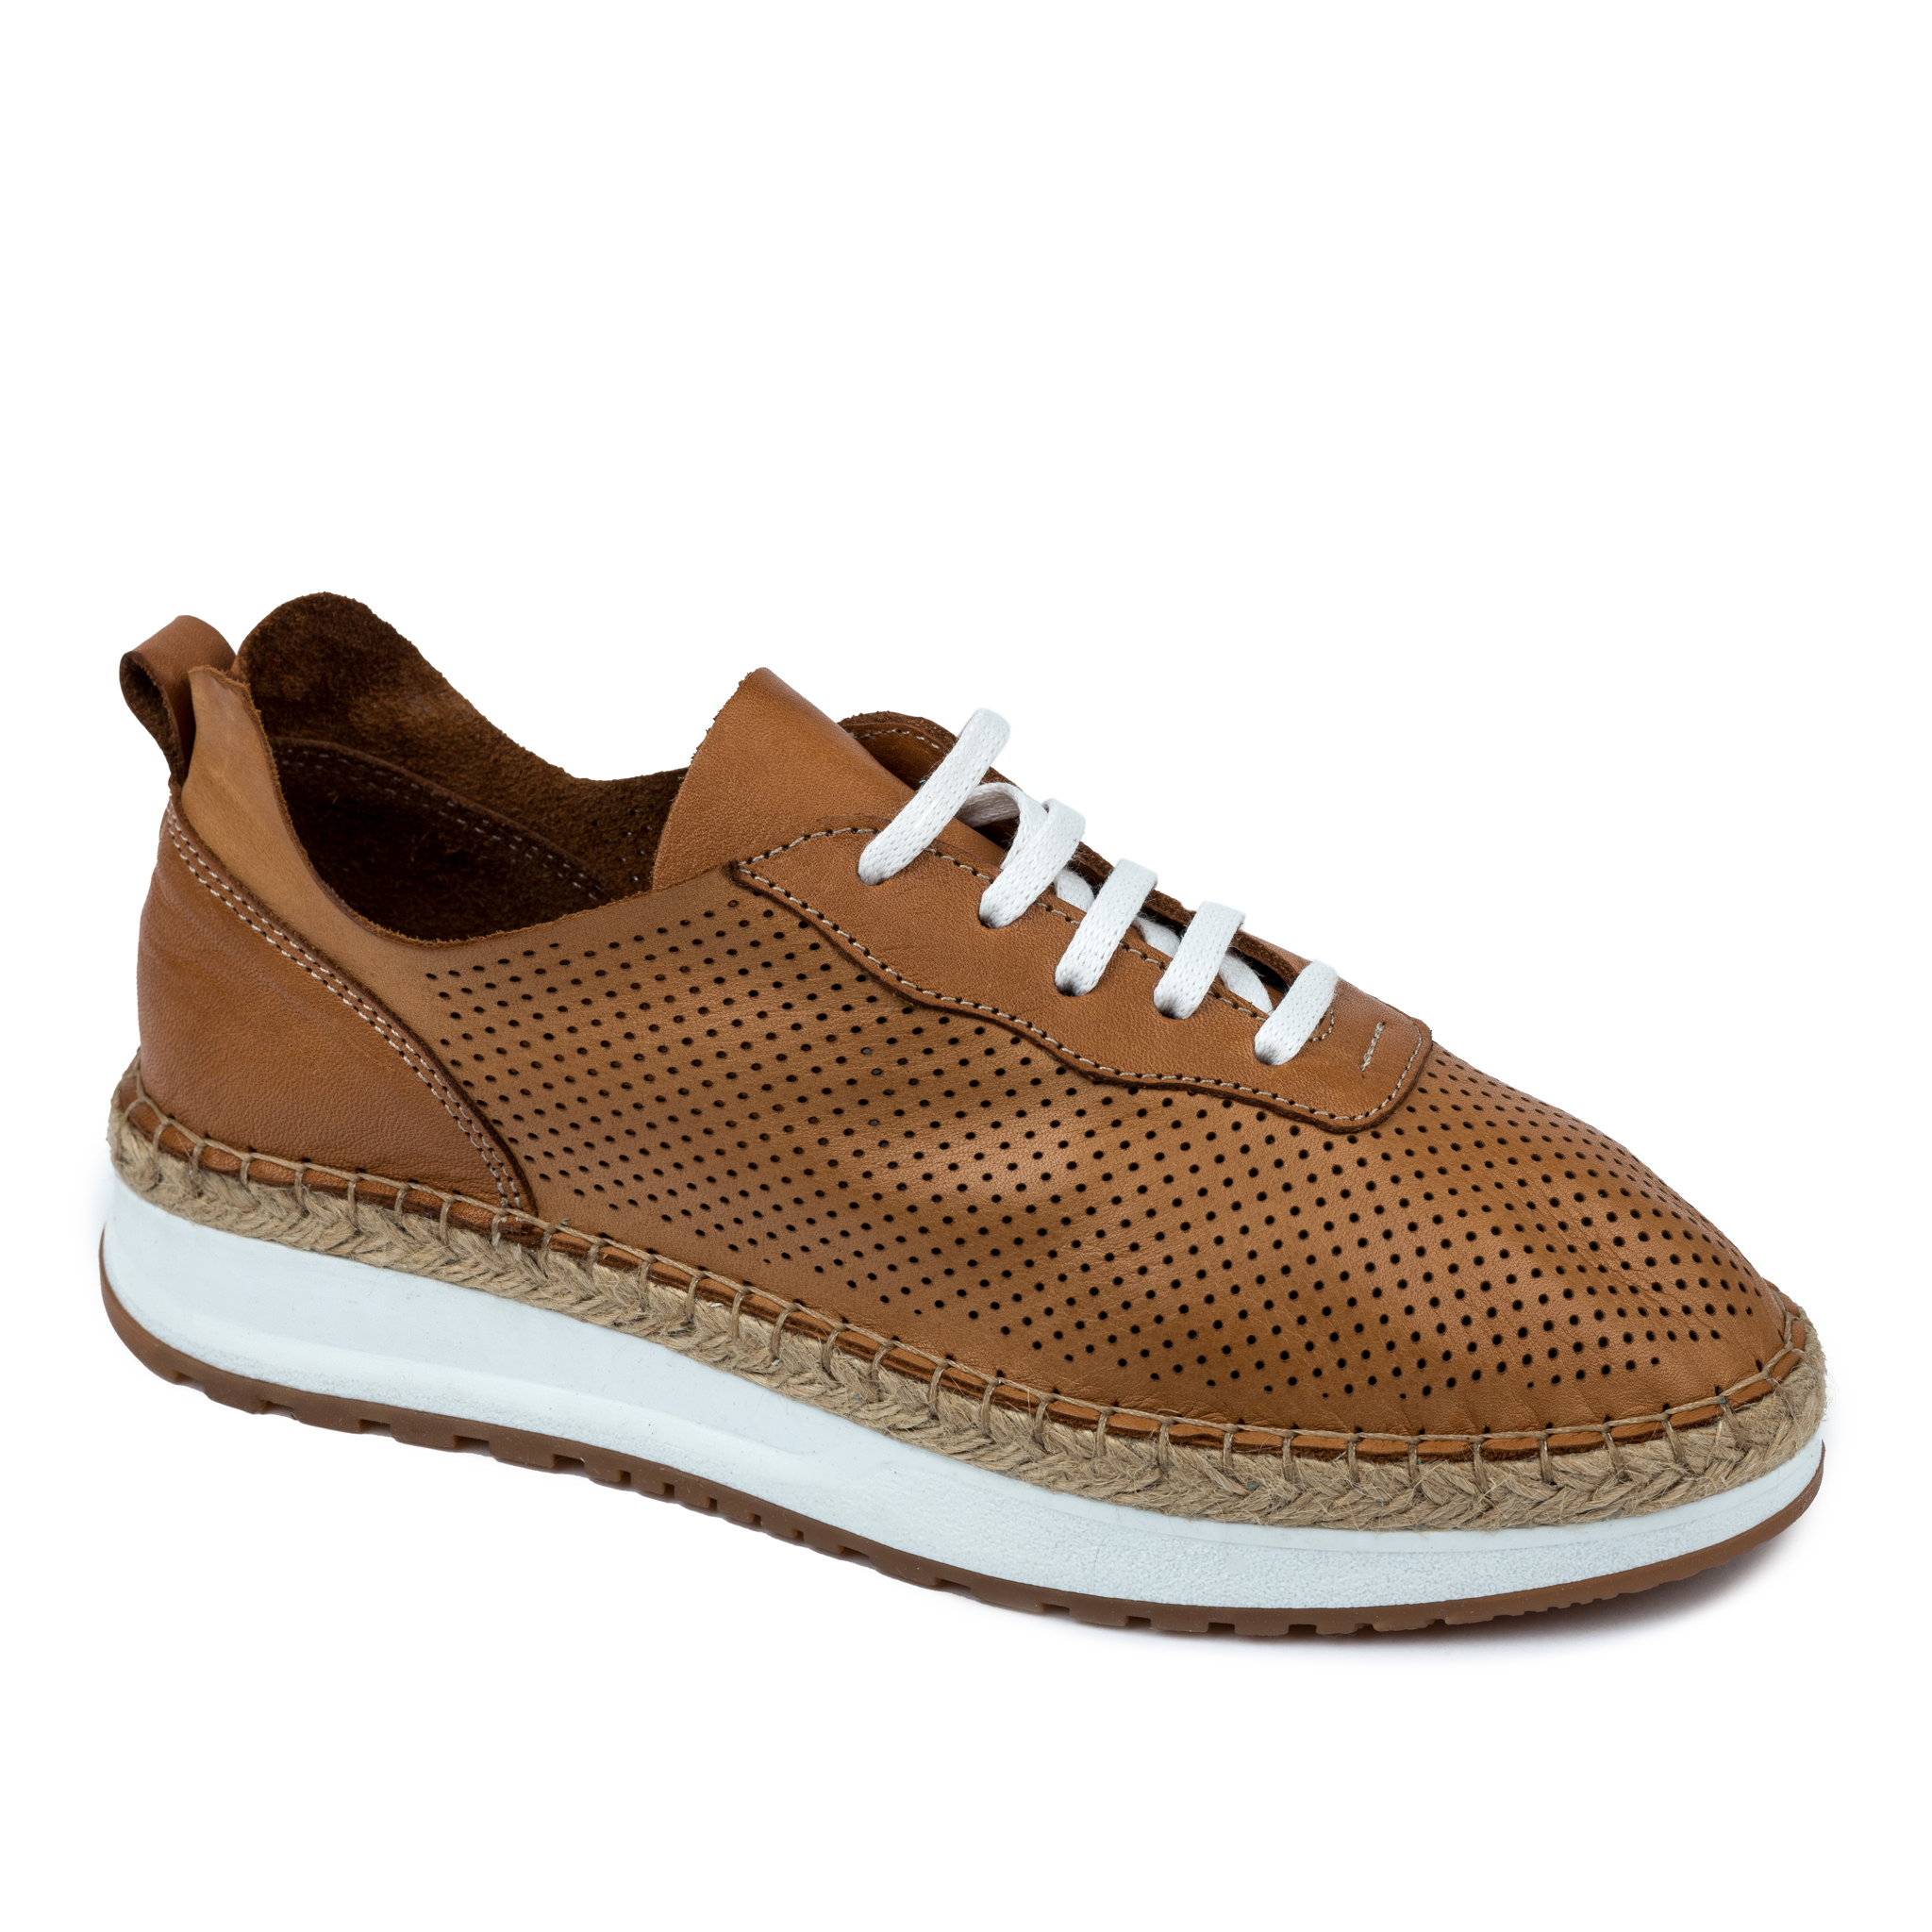 Leather sneakers A548 - CAMEL